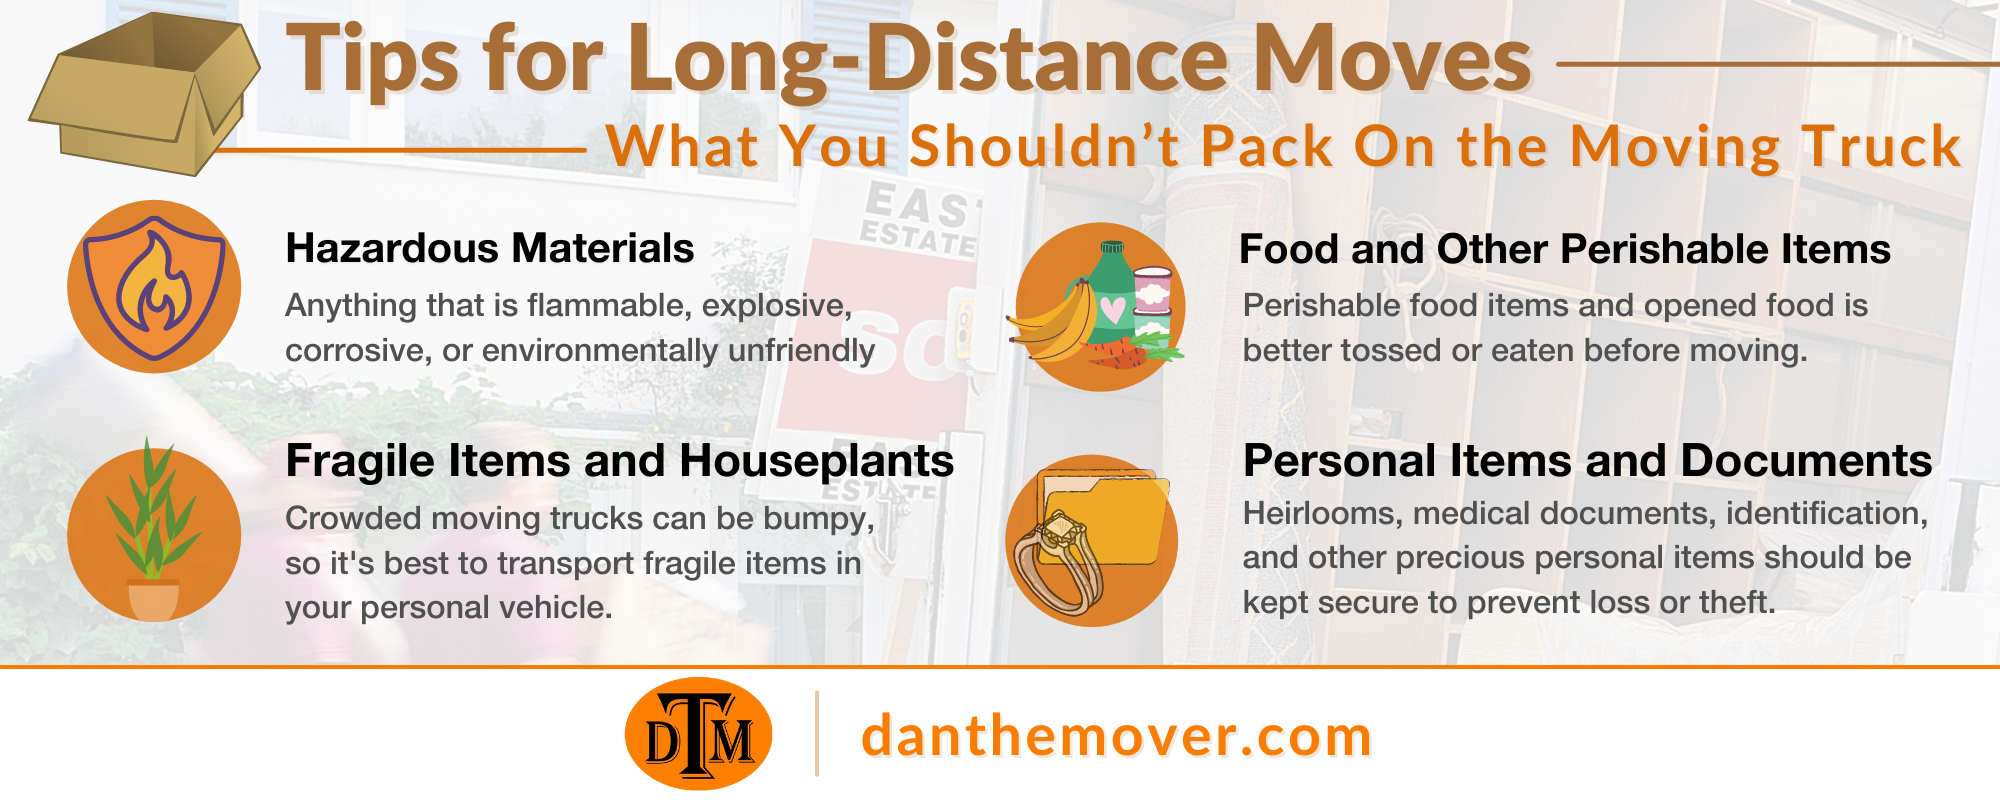 Packing Tips for Your Long-Distance Move – Forbes Home